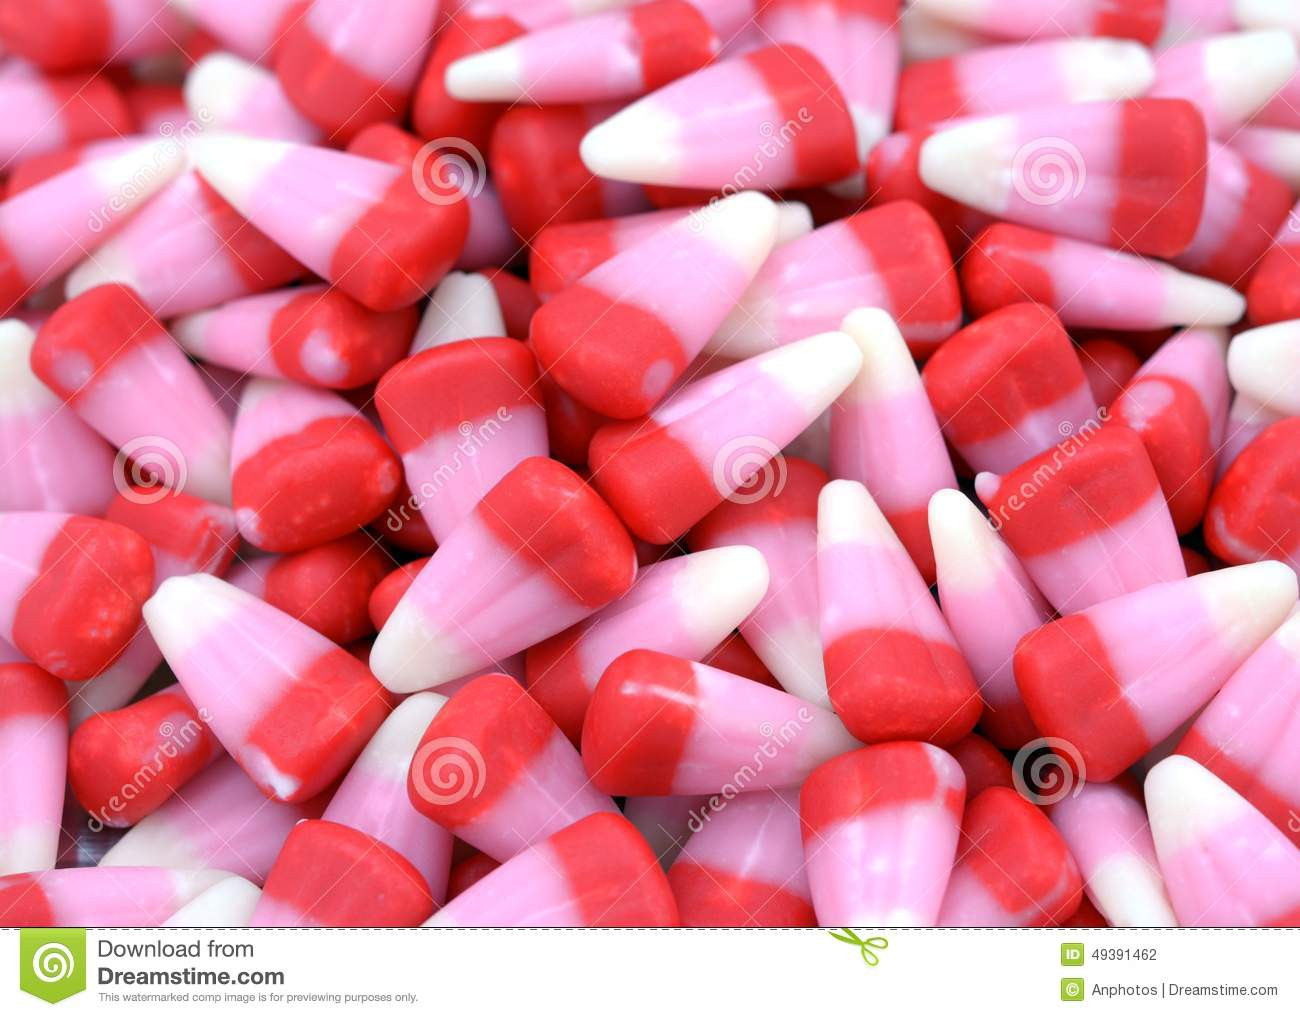 Valentines Day Candy Corn
 Candy Corn For Valentine Day Stock Image of candy